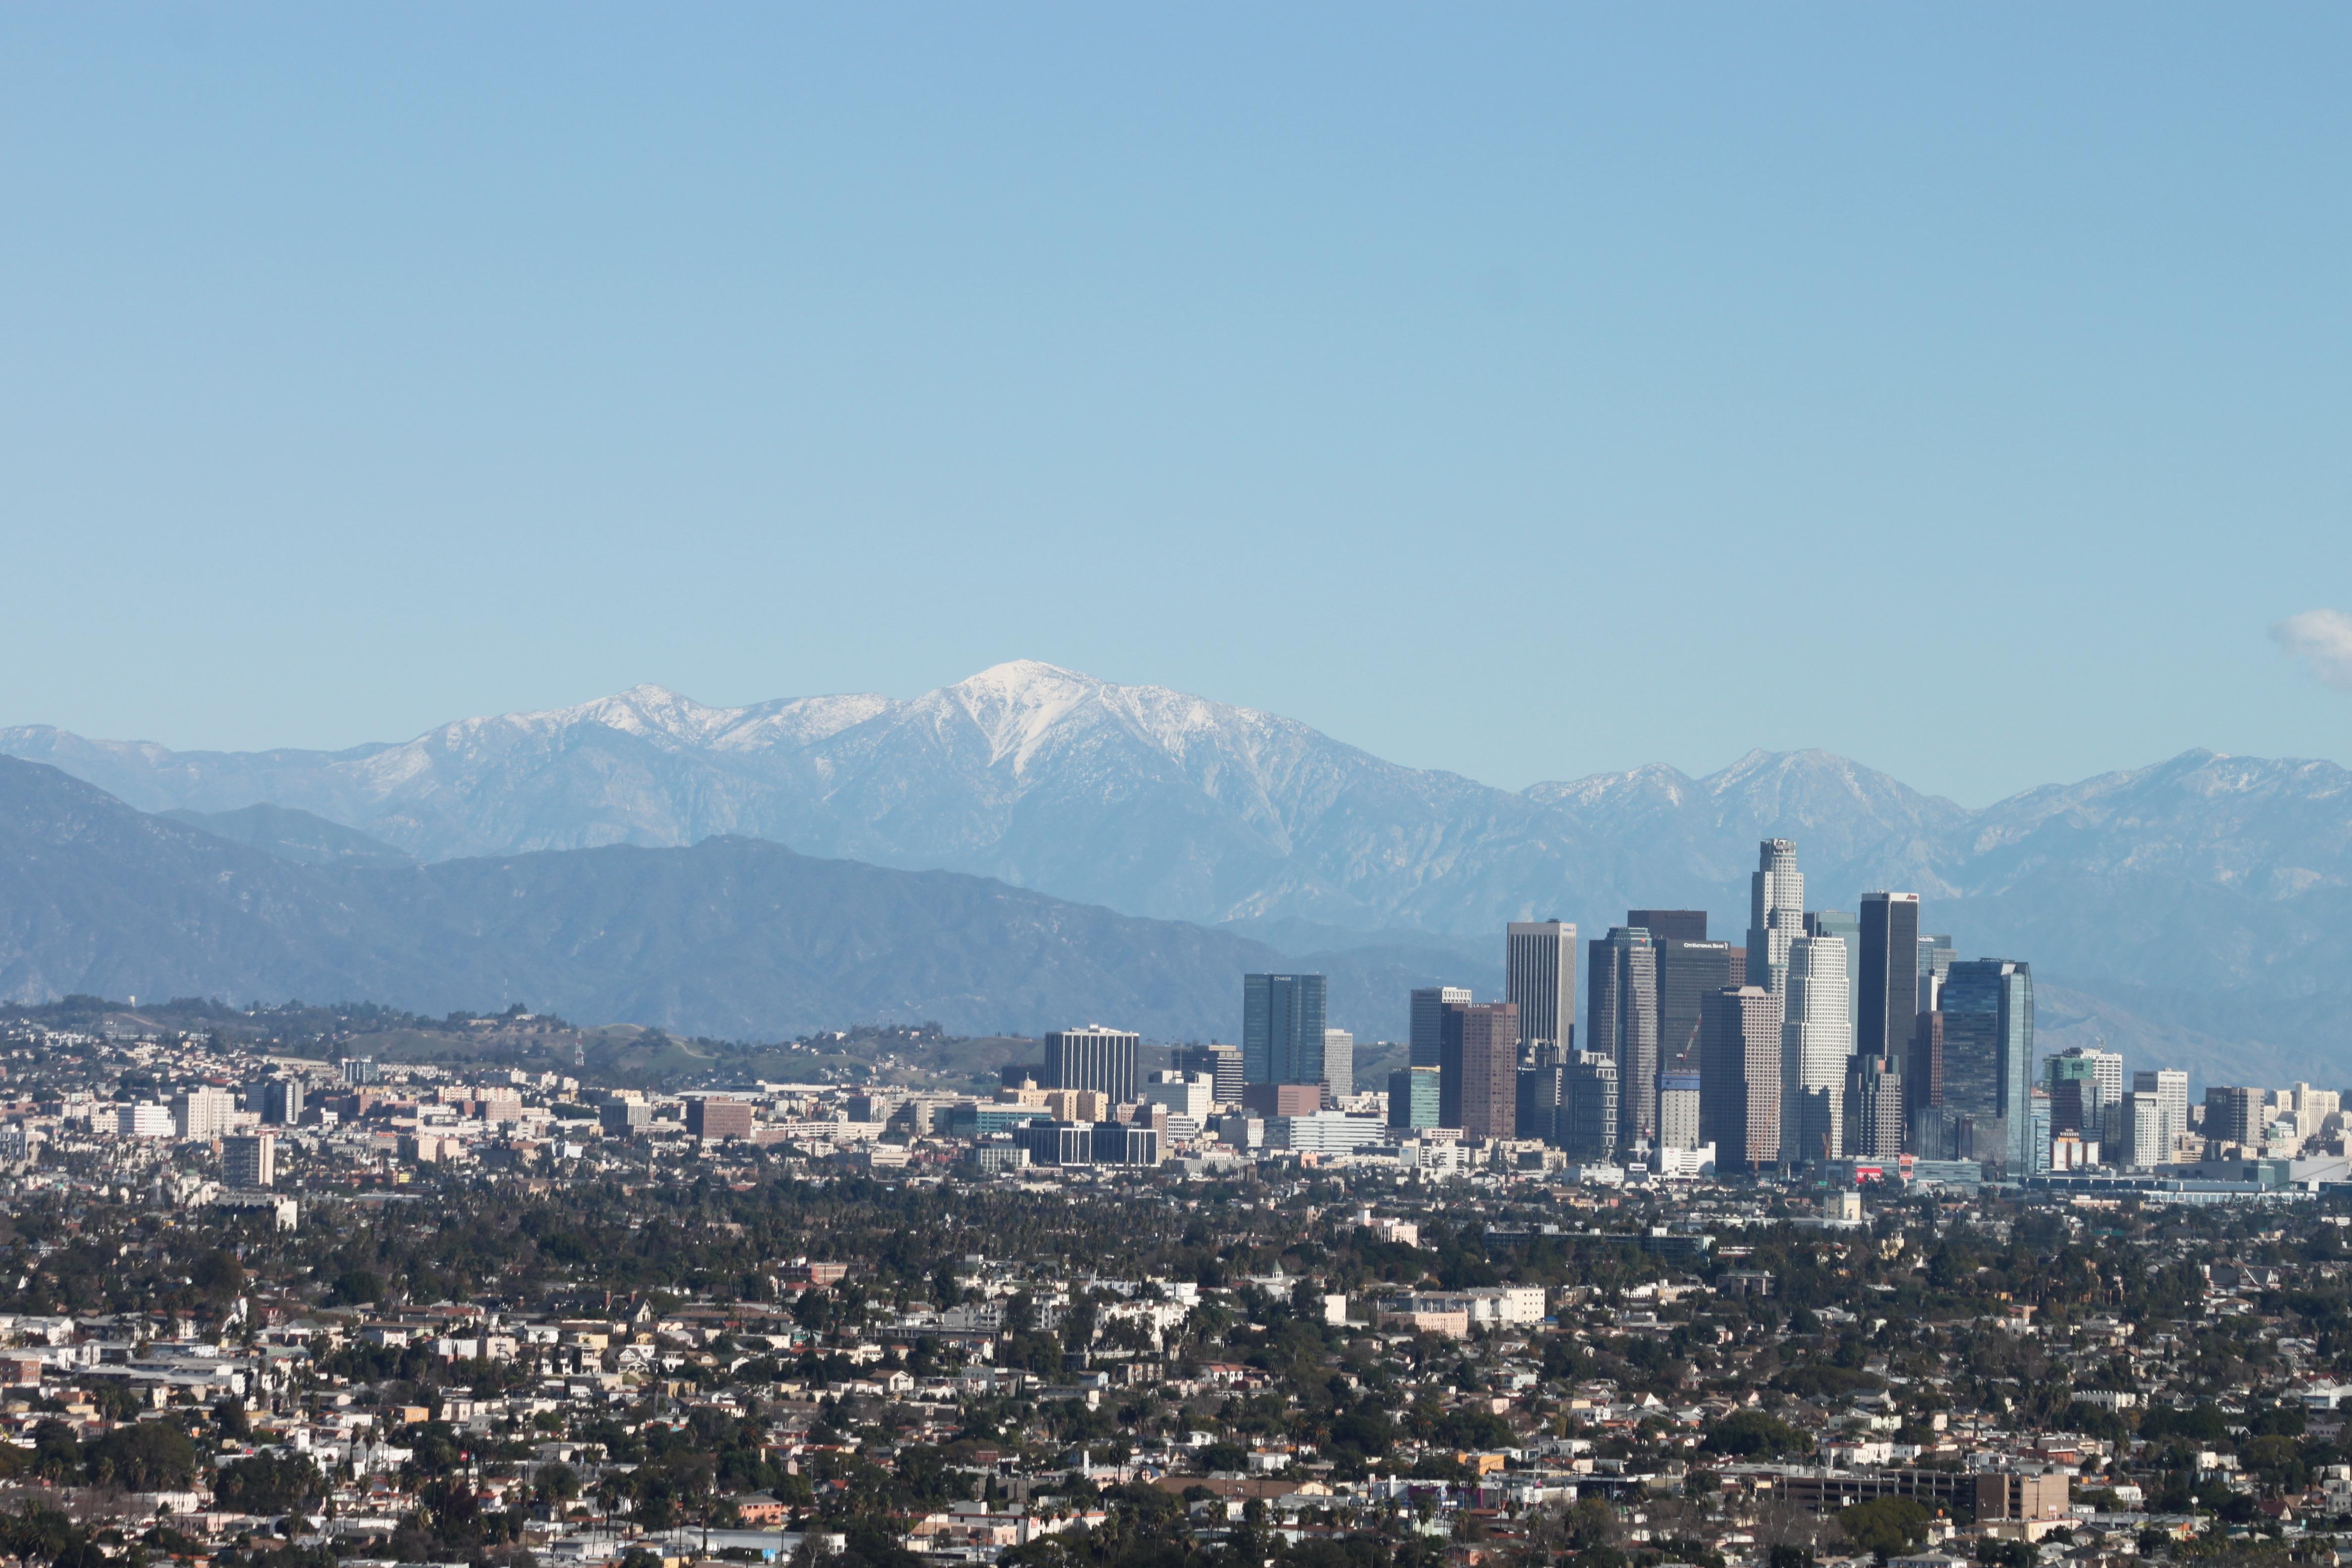 Los Angeles Skyline from the distance